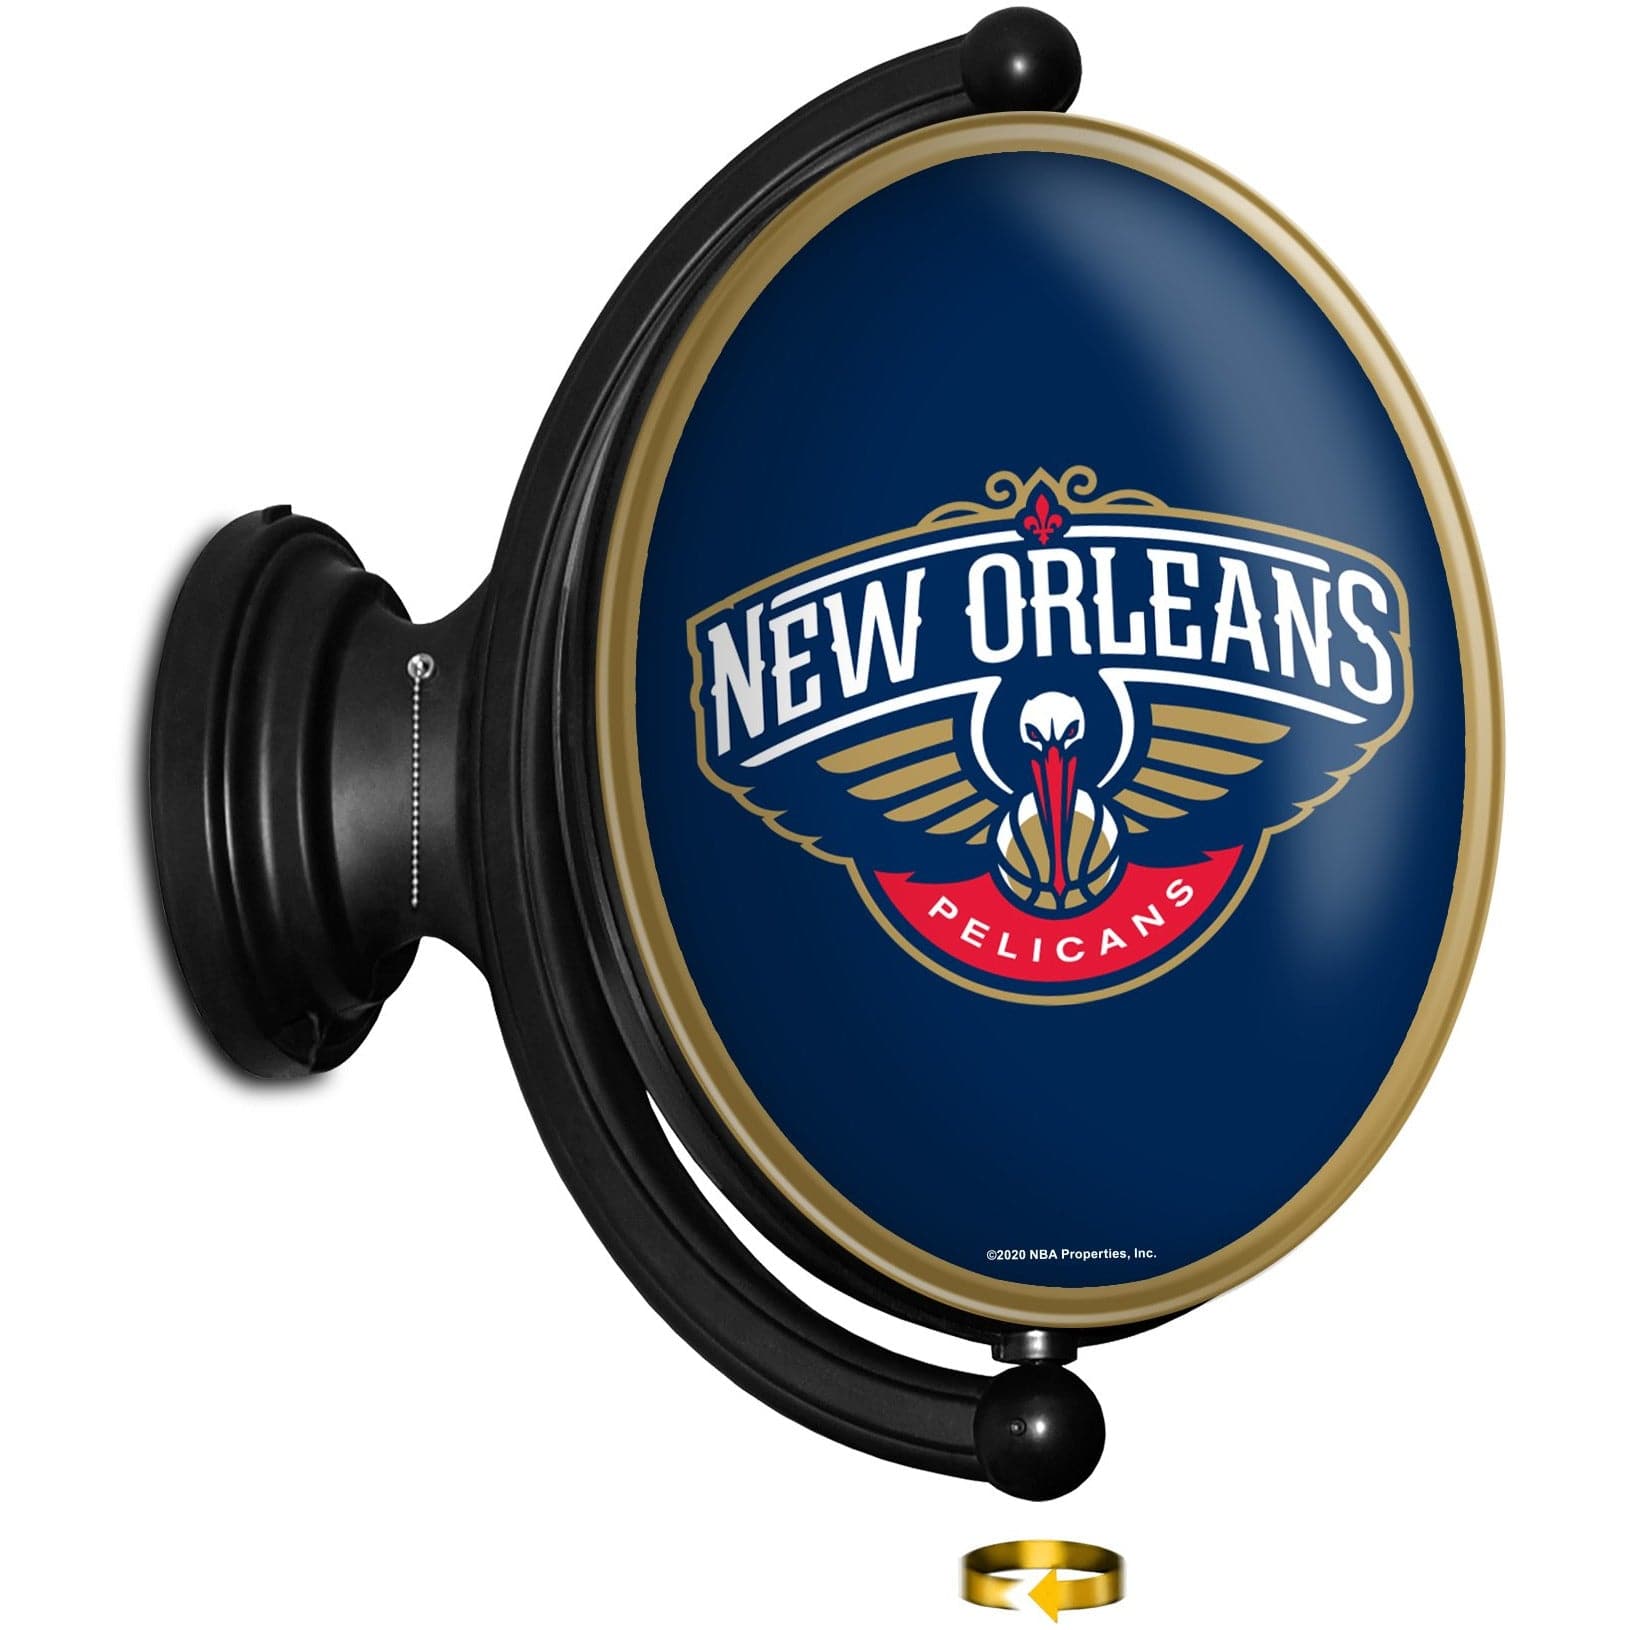 New Orleans Pelicans: Original Oval Rotating Lighted Wall Sign - The Fan-Brand